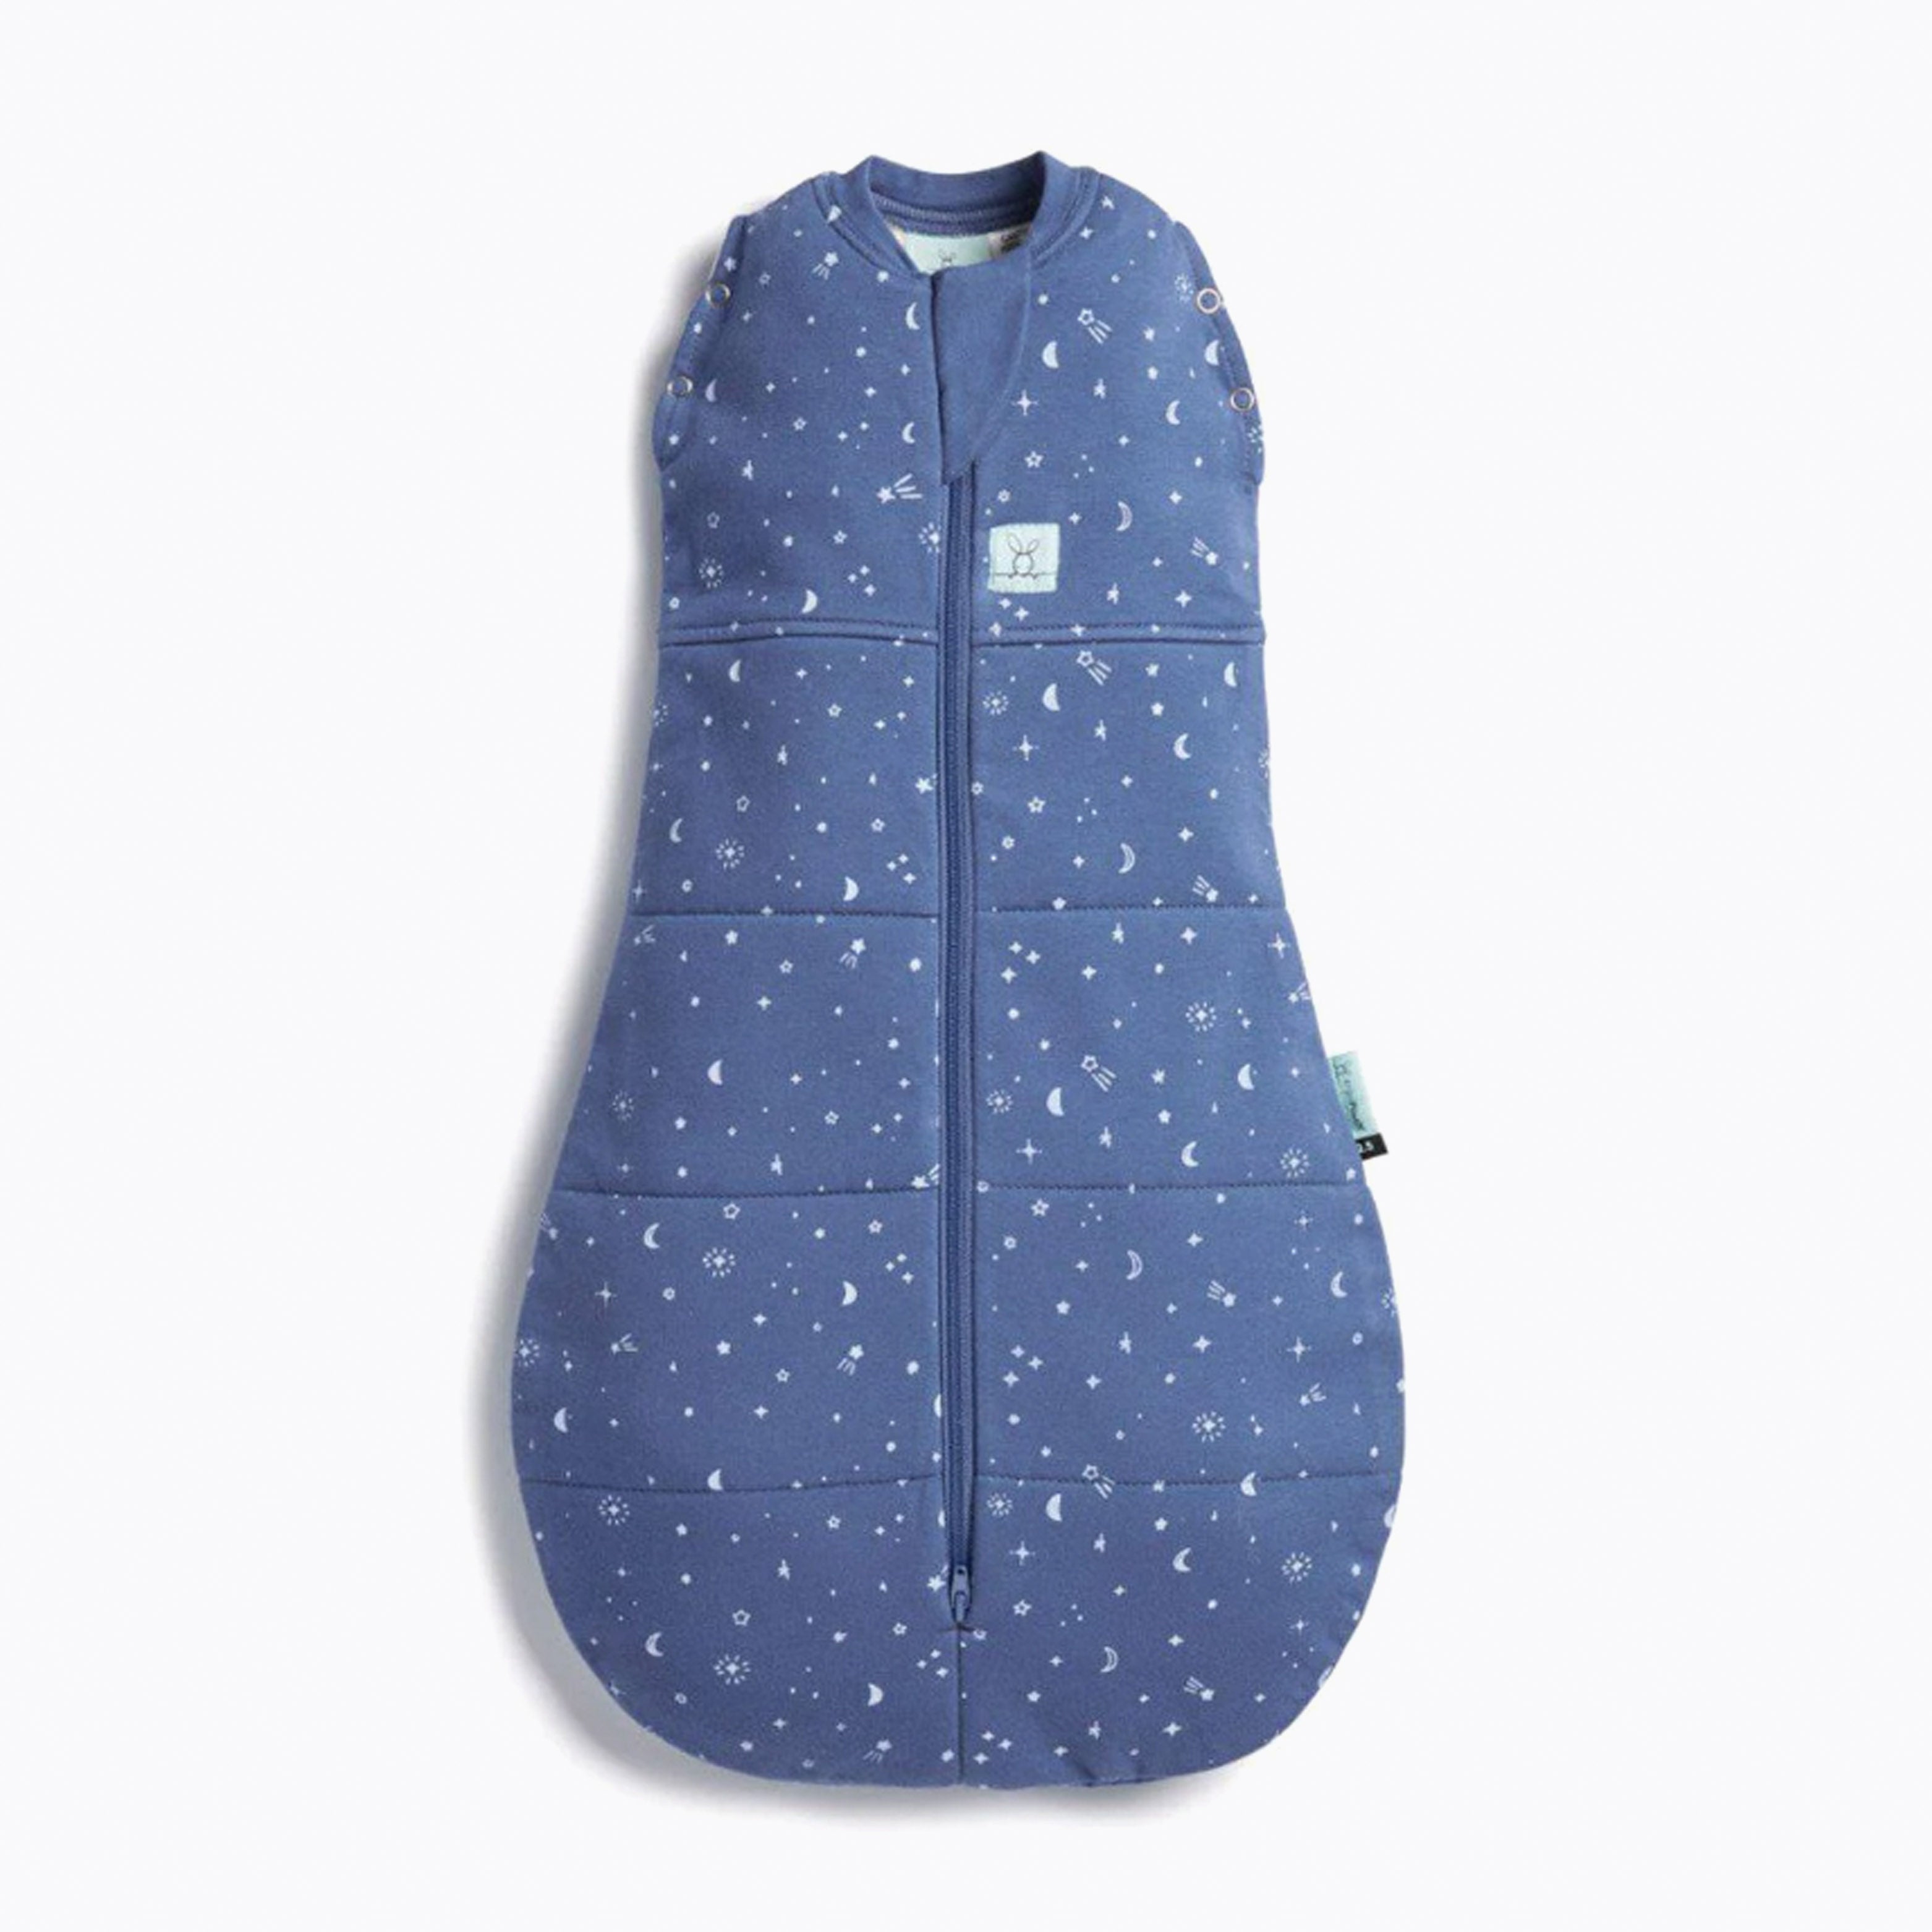 An image of Swaddle Bag - Sleeping Bag - 2.5 TOG Night Sky | ergoPouch